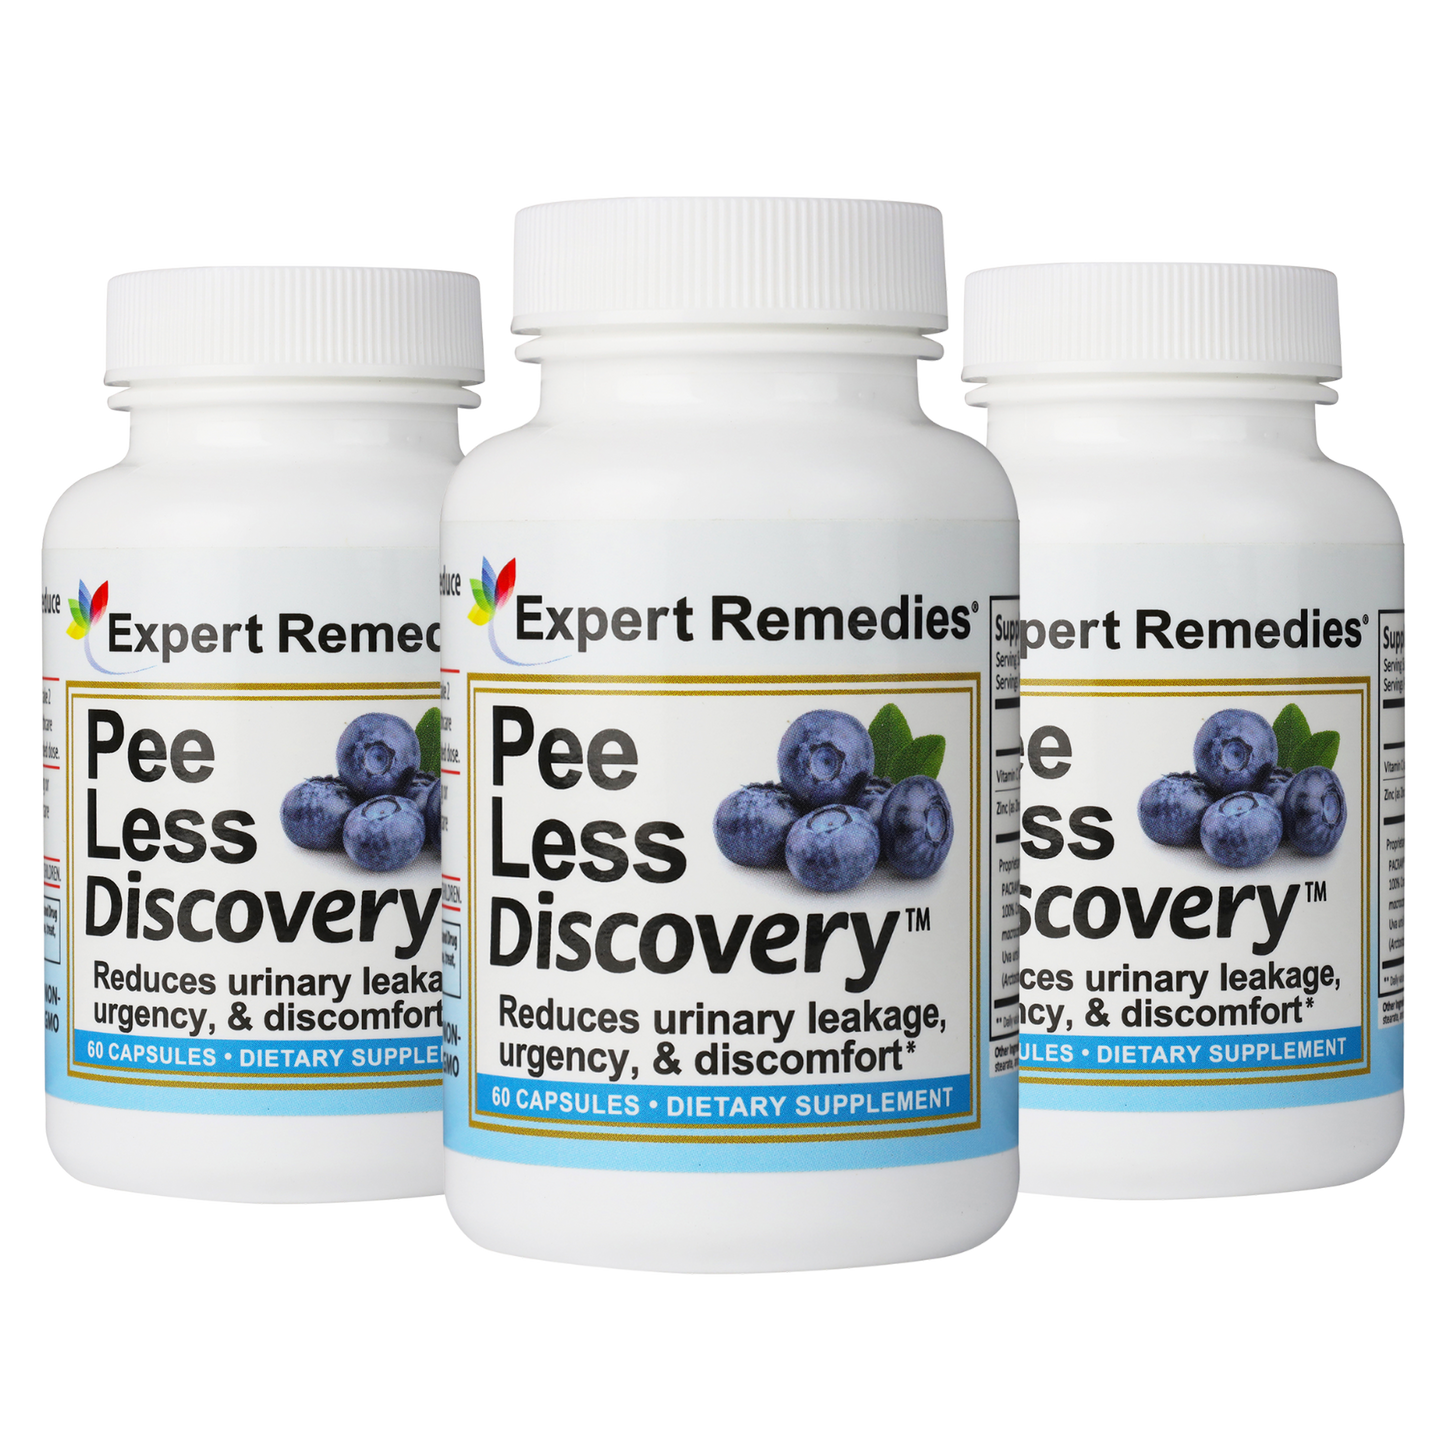 Buy 3 Bottles of Pee Less Discovery Now 41% OFF